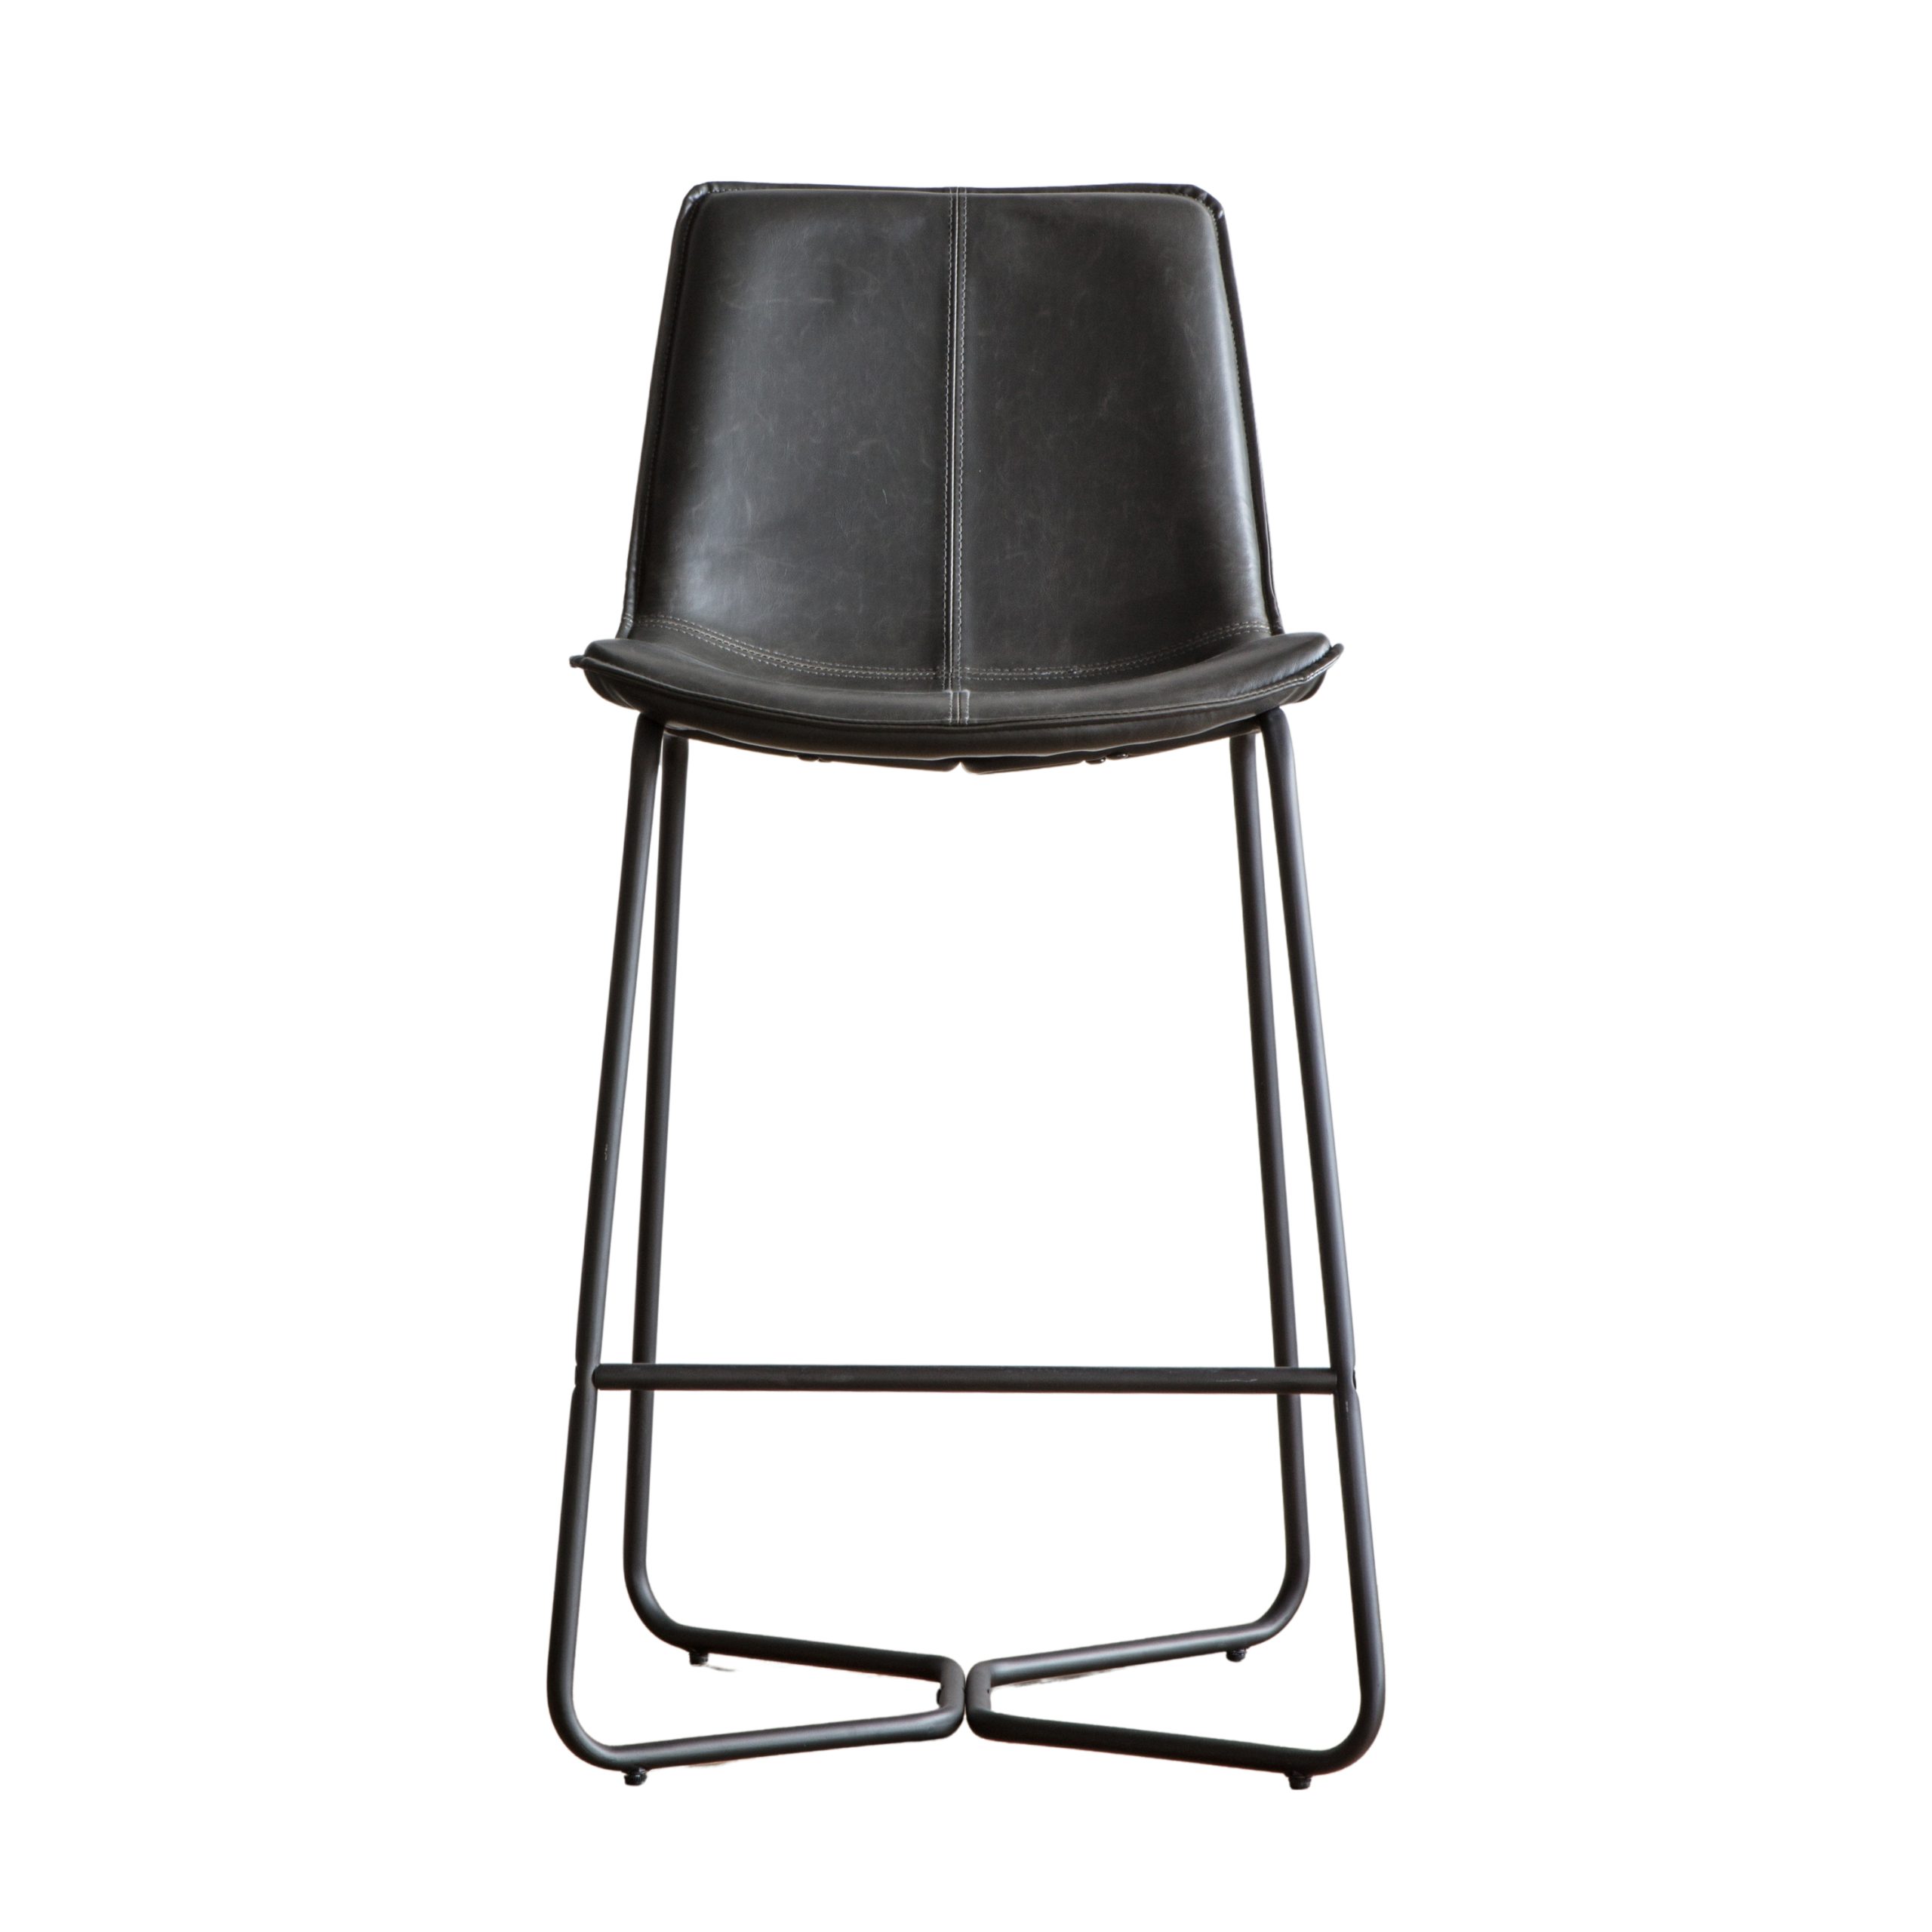 Gallery Direct Hawking Stool Charcoal (Set of 2)